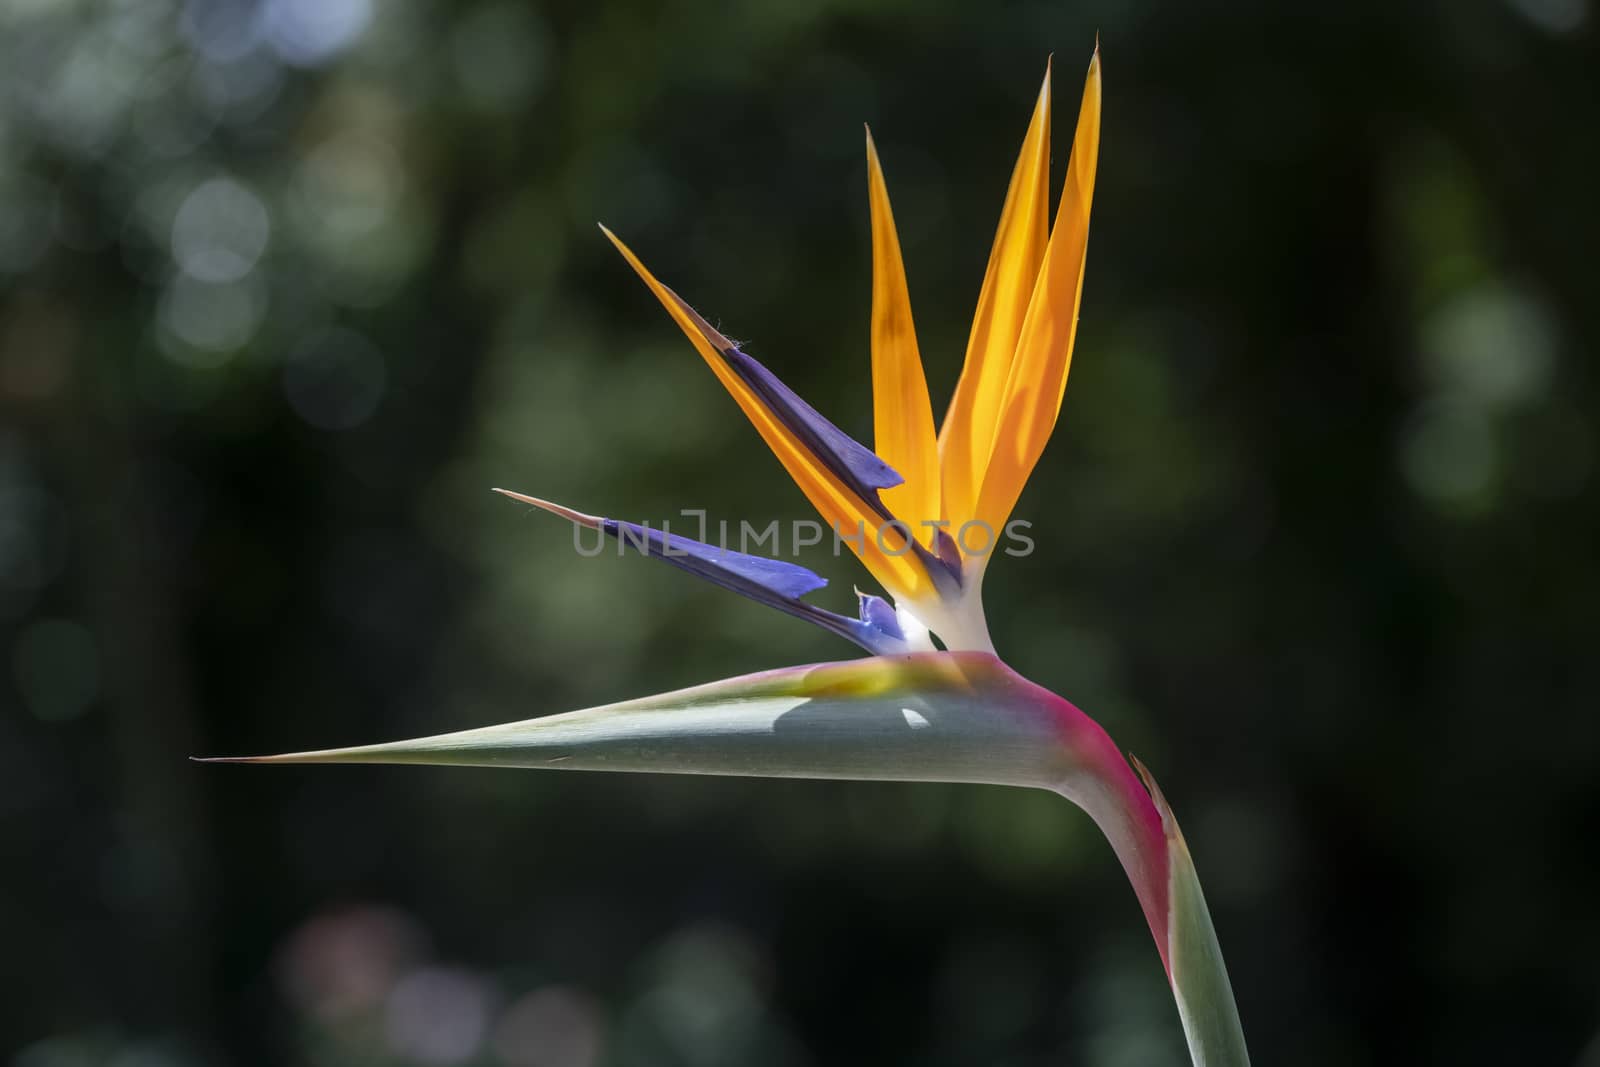 ‎Close up of a paradise bird flower blooming under the late spring sun light against a blurry green leafs background - Strelitzia by ankorlight